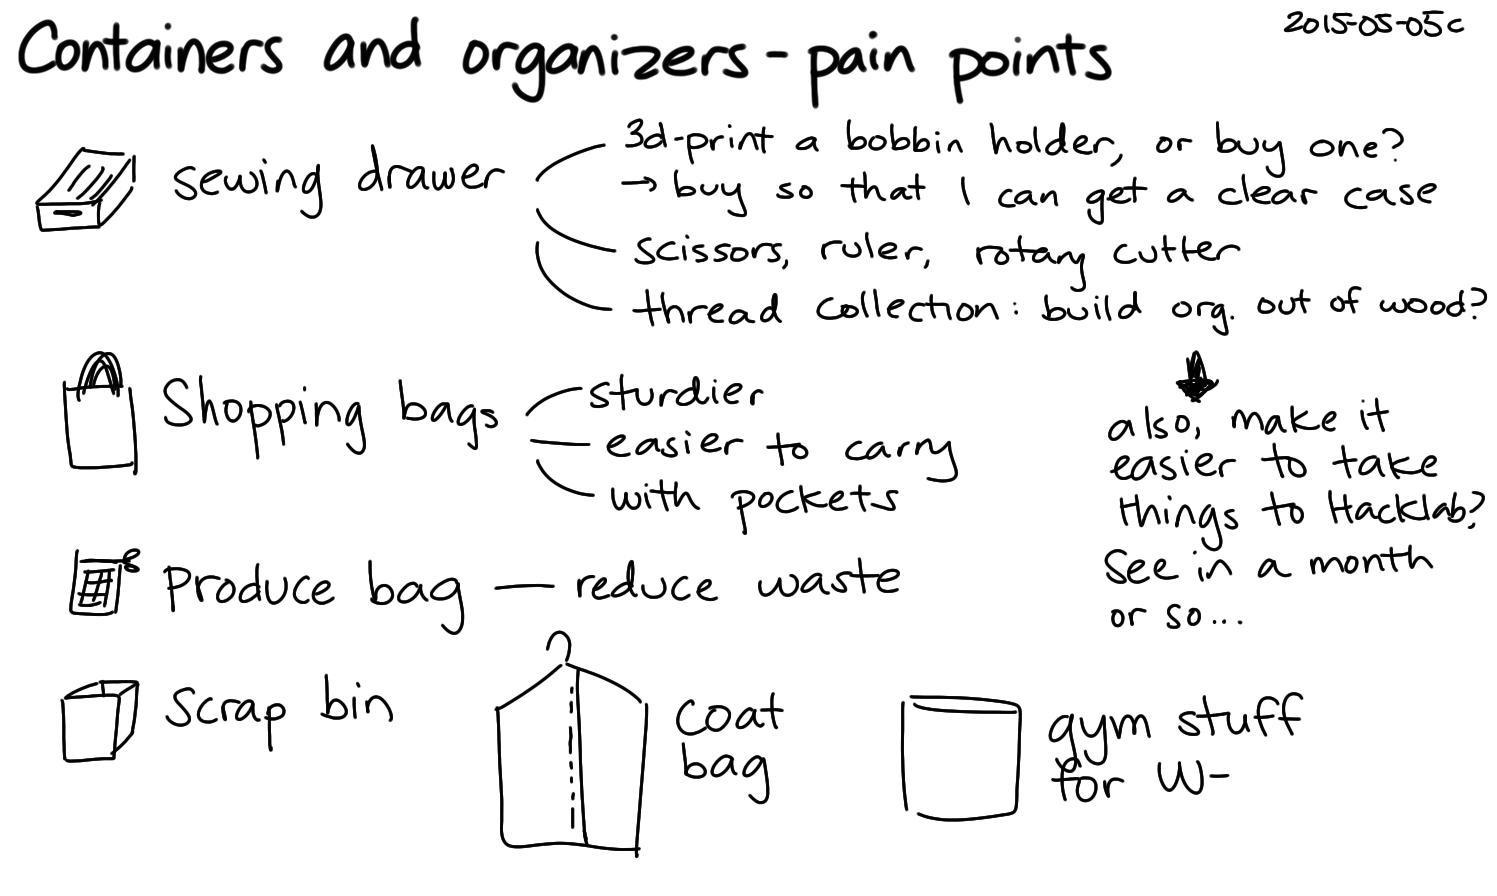 2015-05-05c Containers and organizers - pain points -- index card #sewing.png